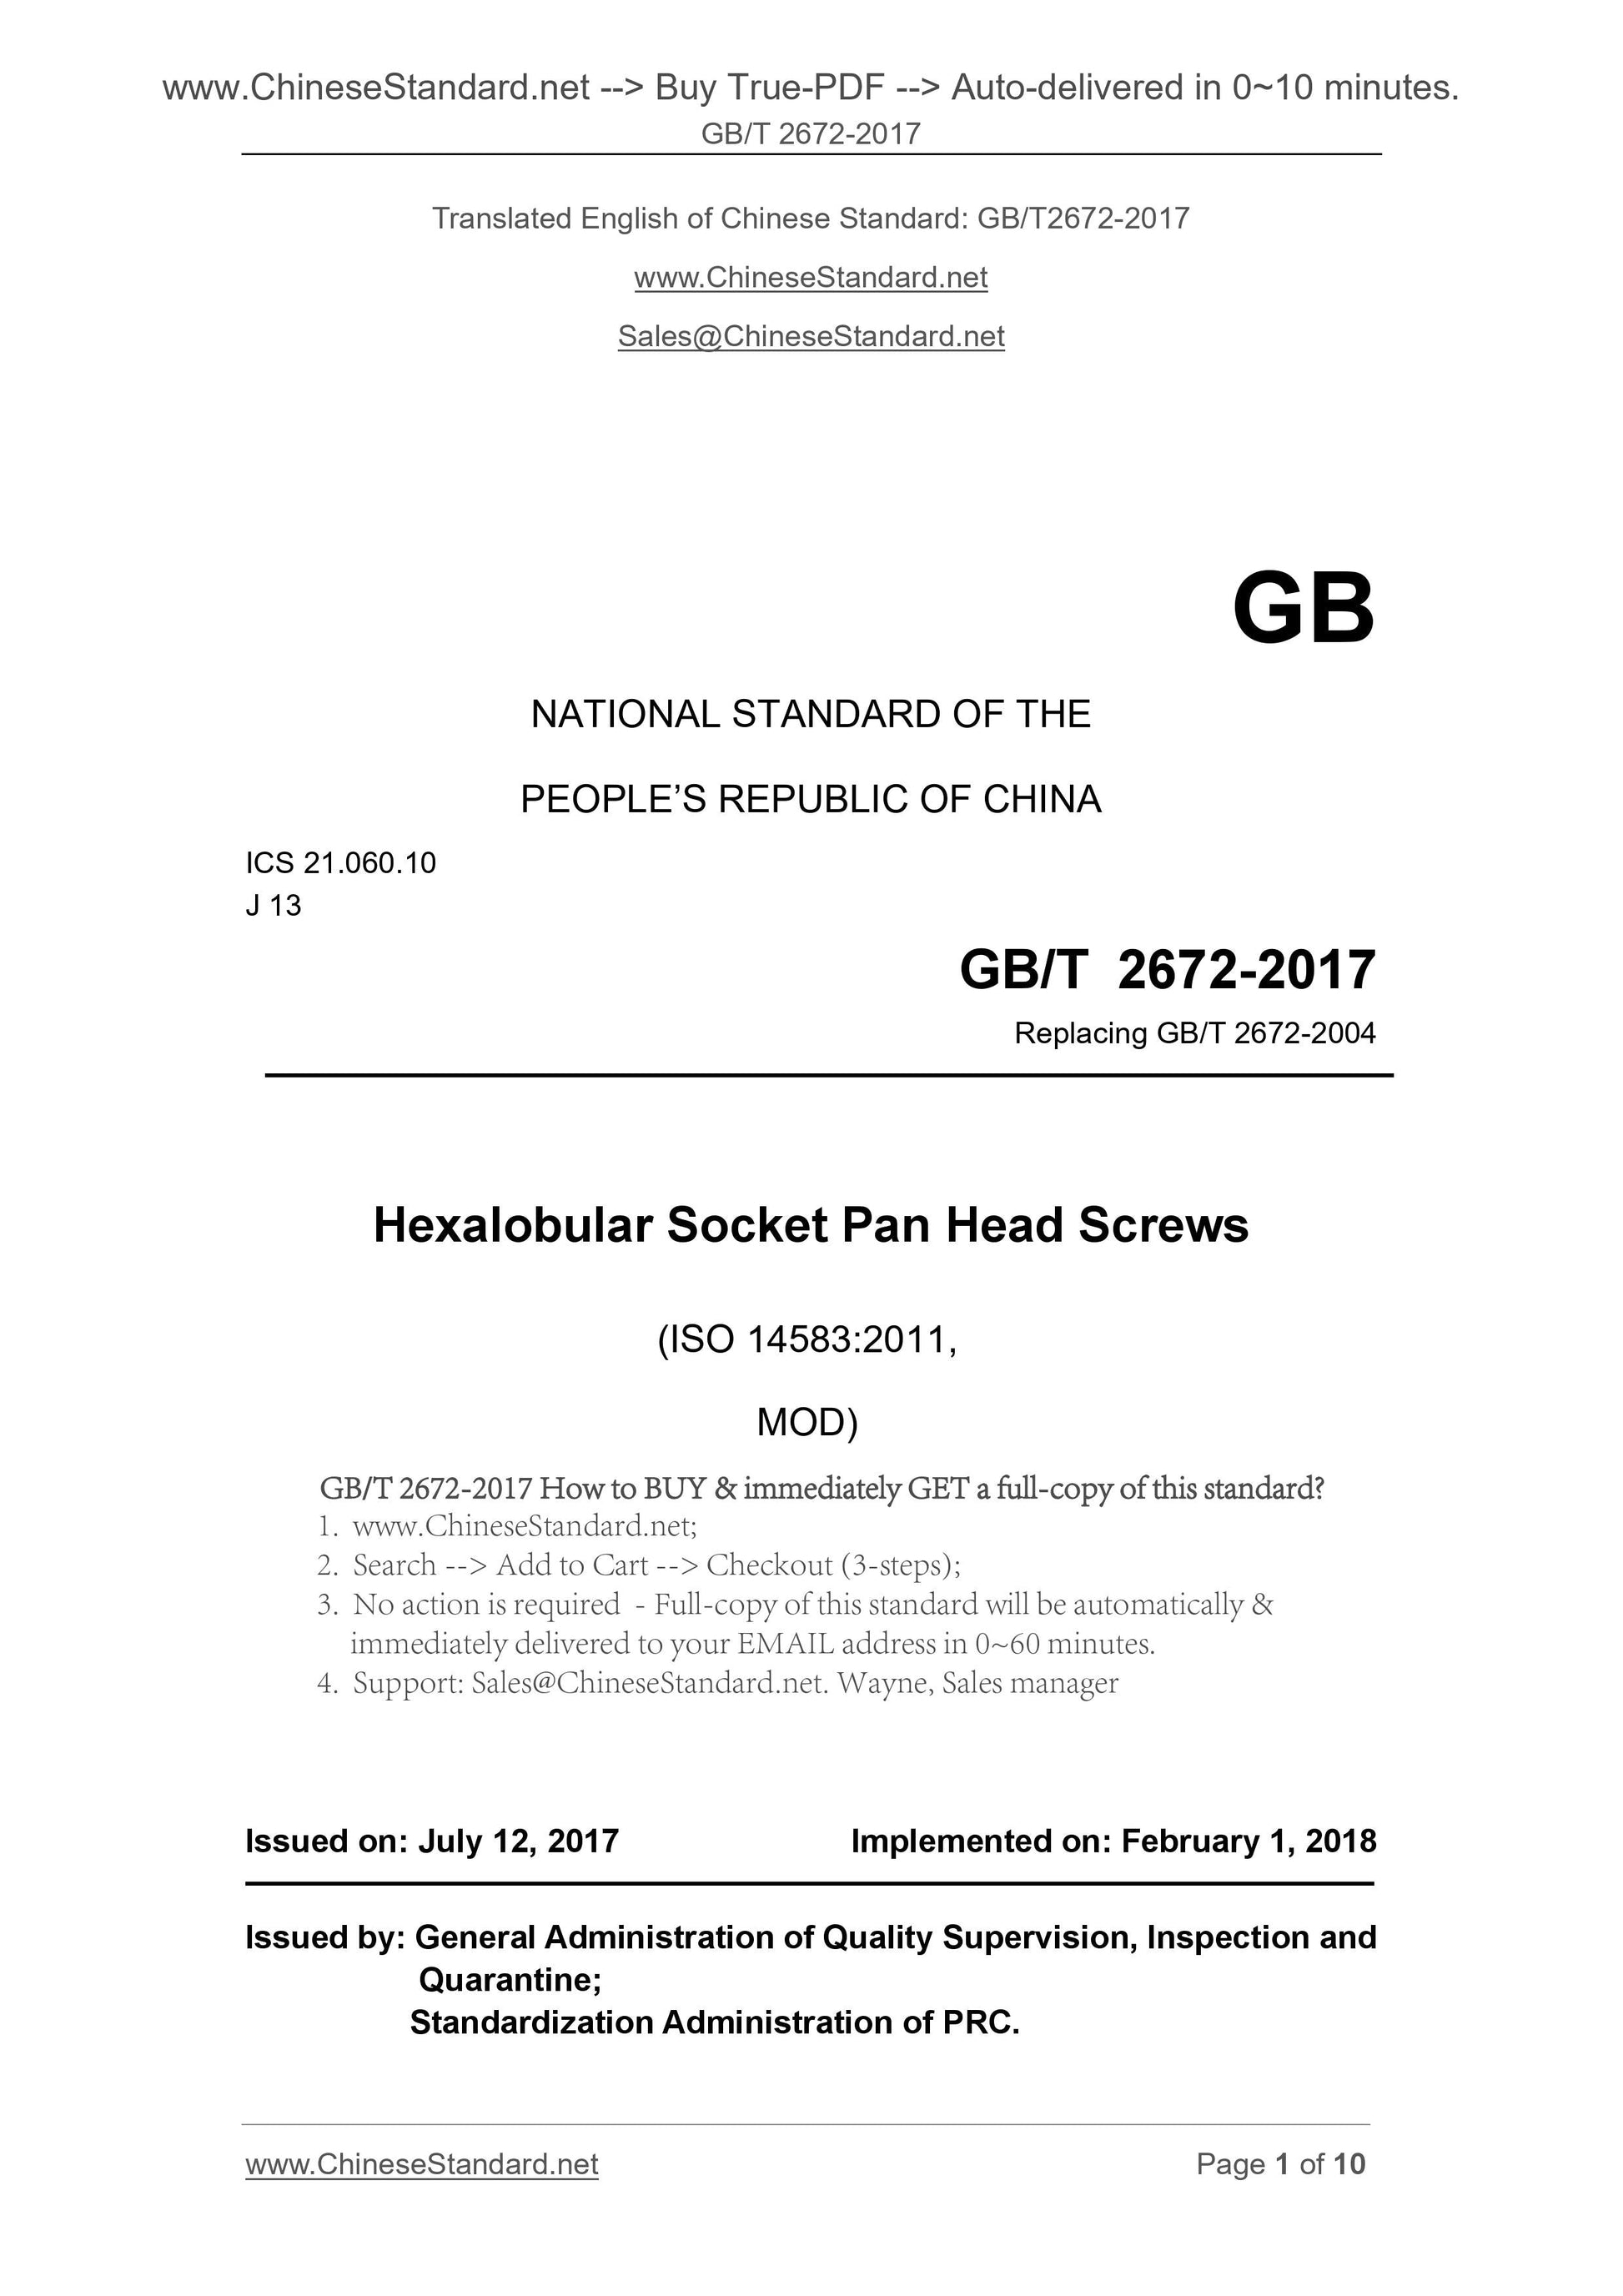 GB/T 2672-2017 Page 1